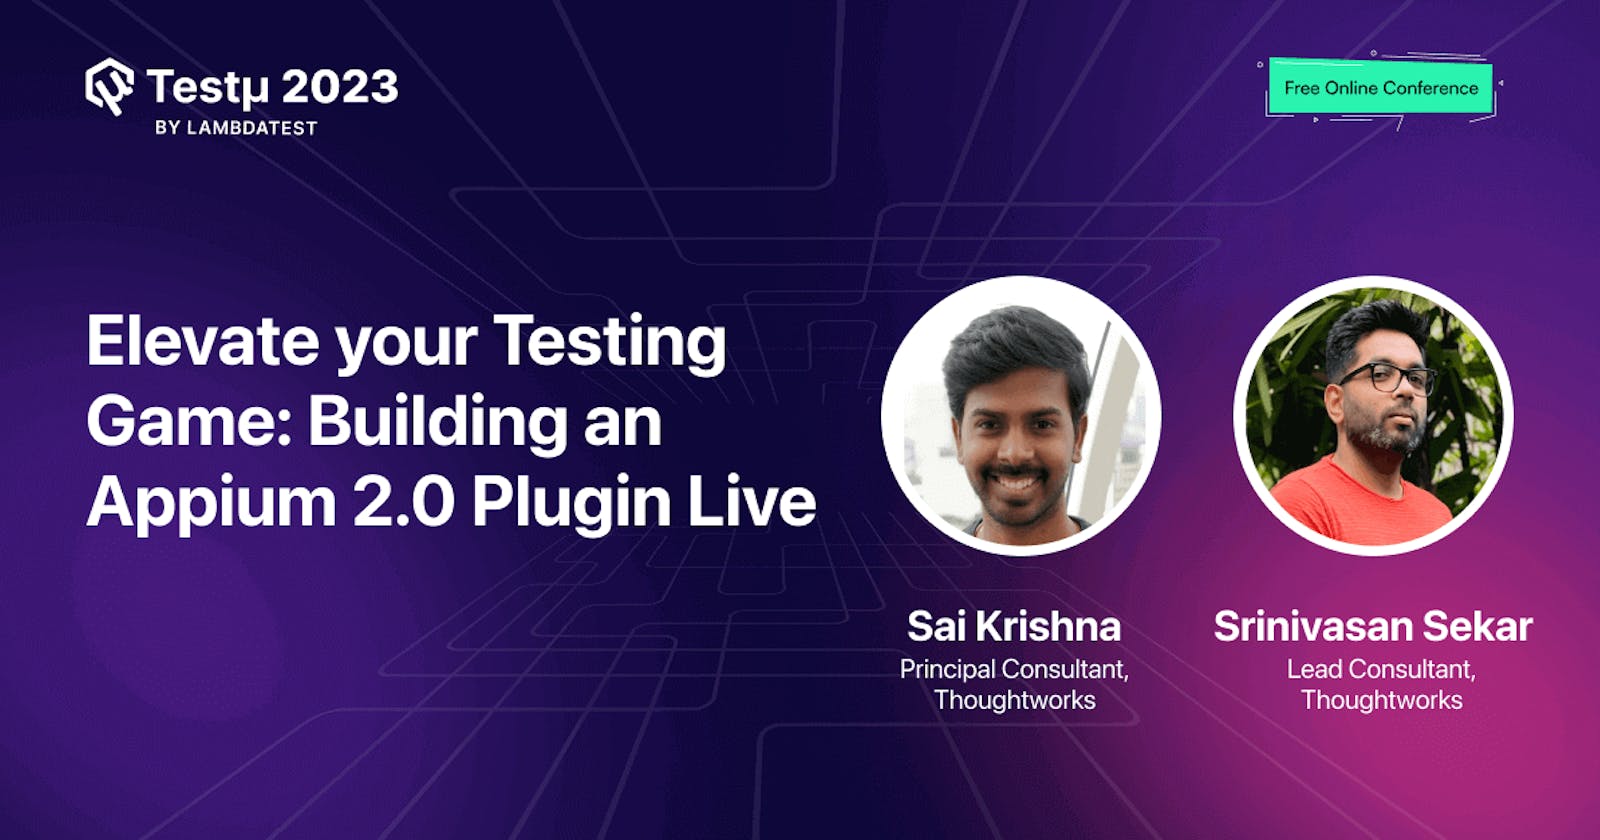 Elevate Your Testing Game: Building an Appium 2.0 Plugin Live [Testμ 2023]